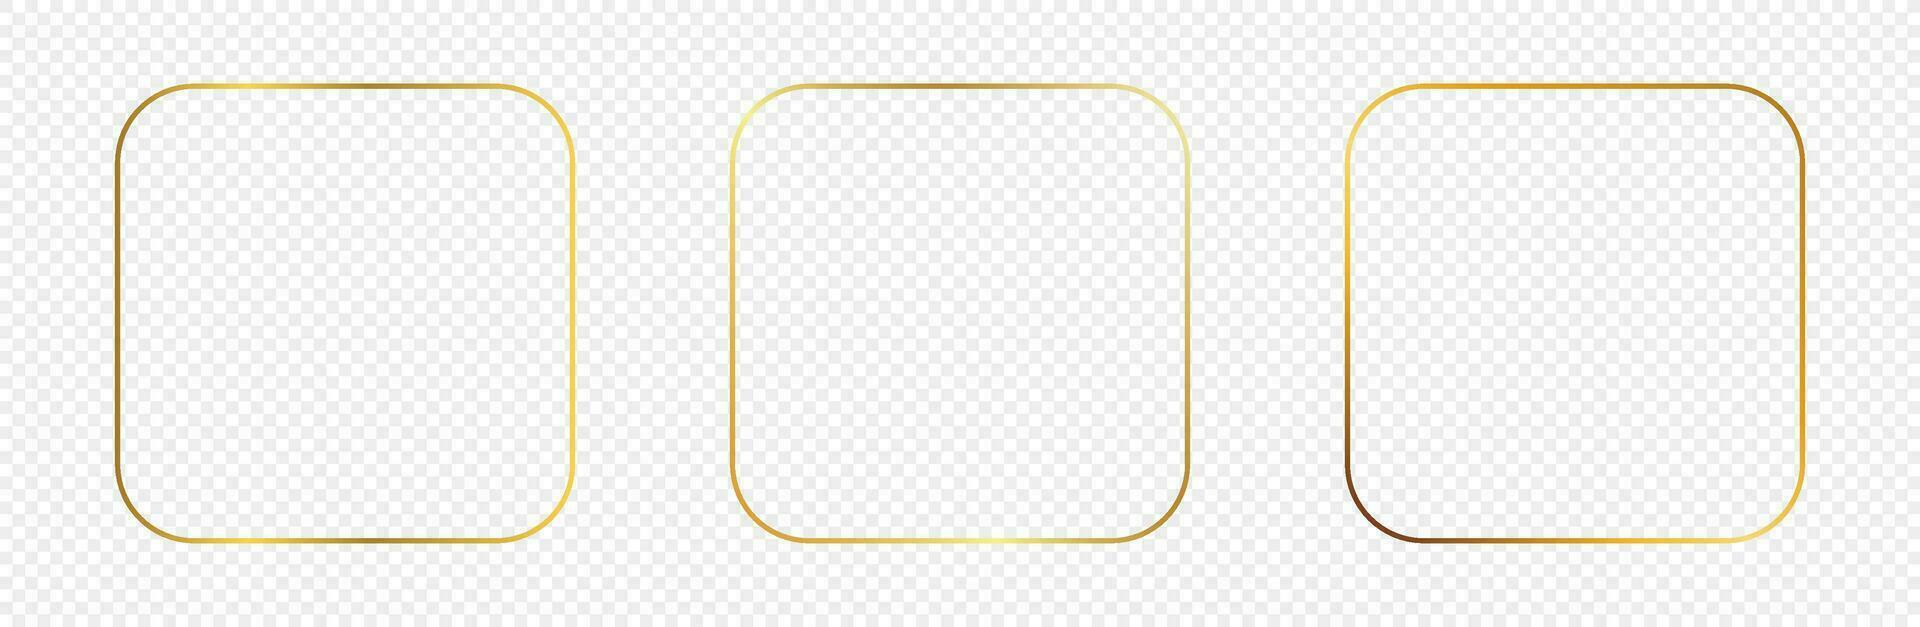 Gold glowing rounded square frame vector